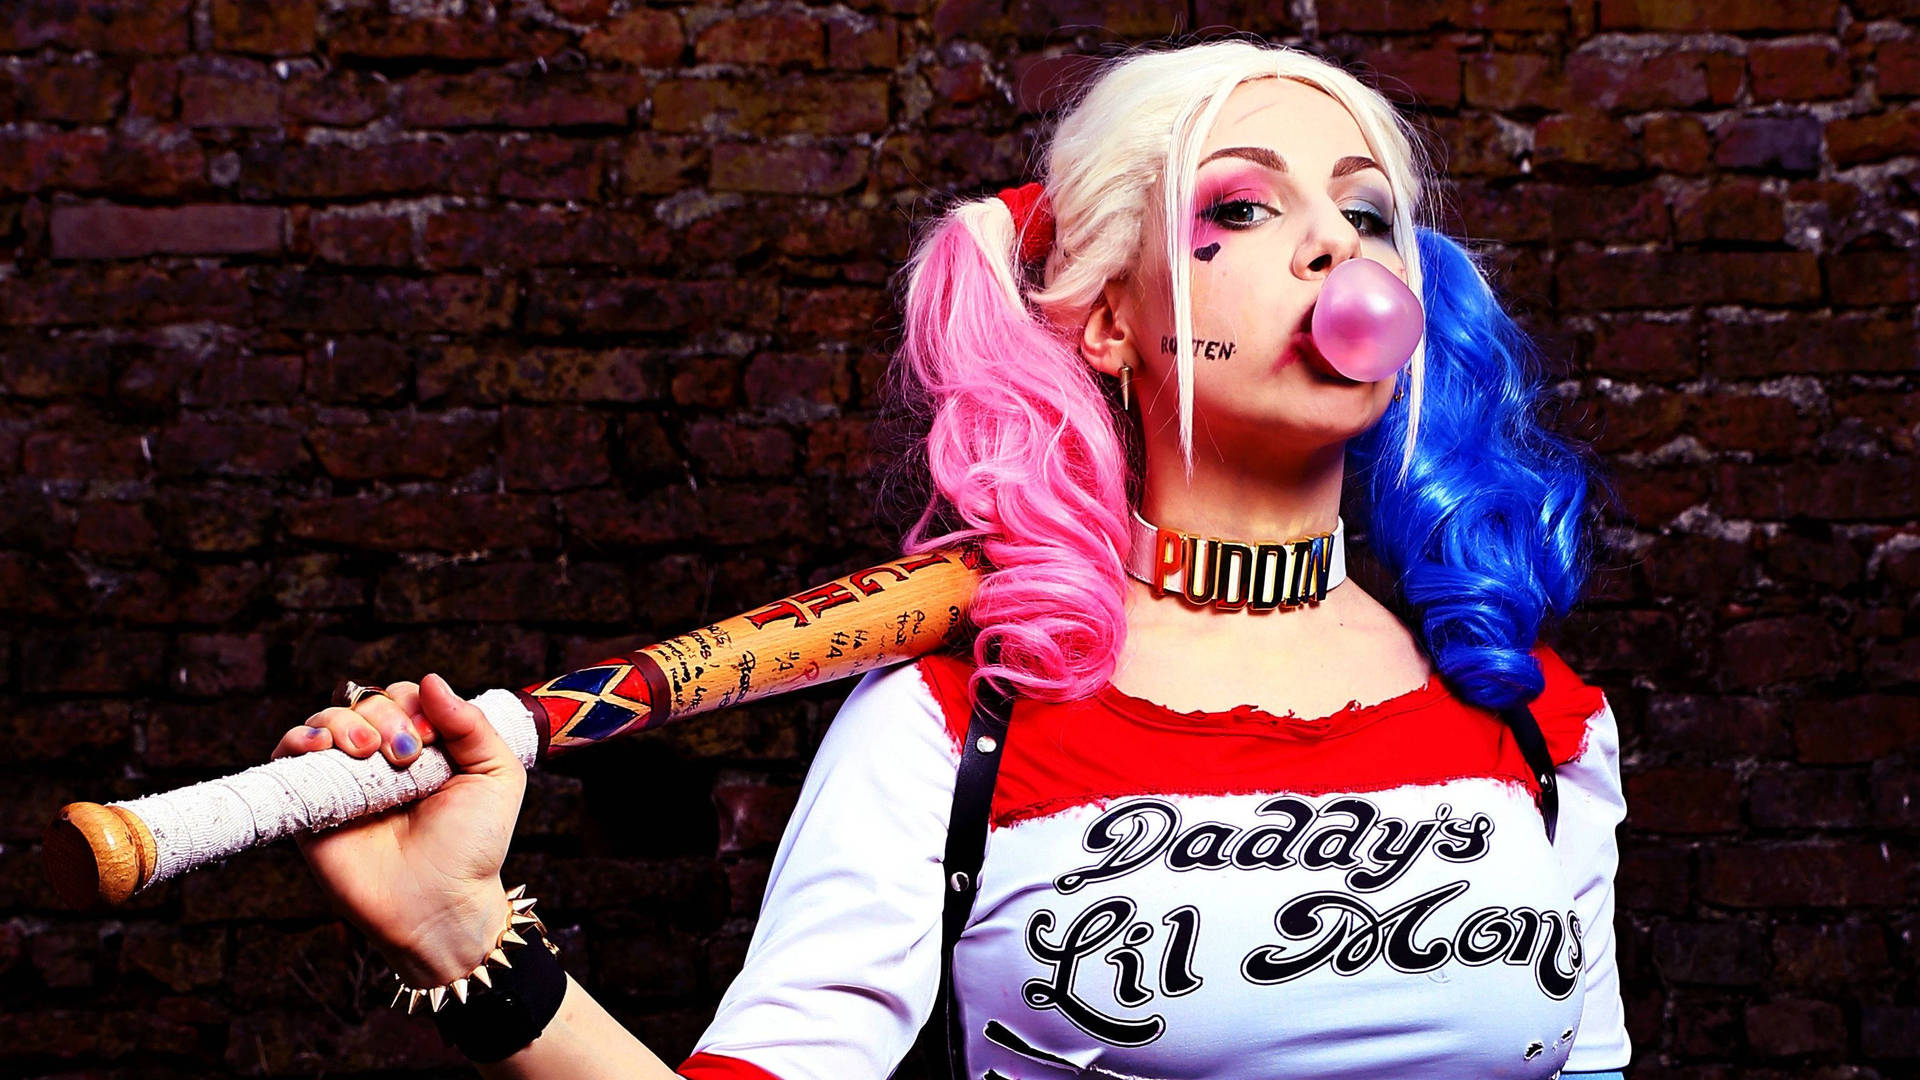 4k Harley Quinn From Suicide Squad